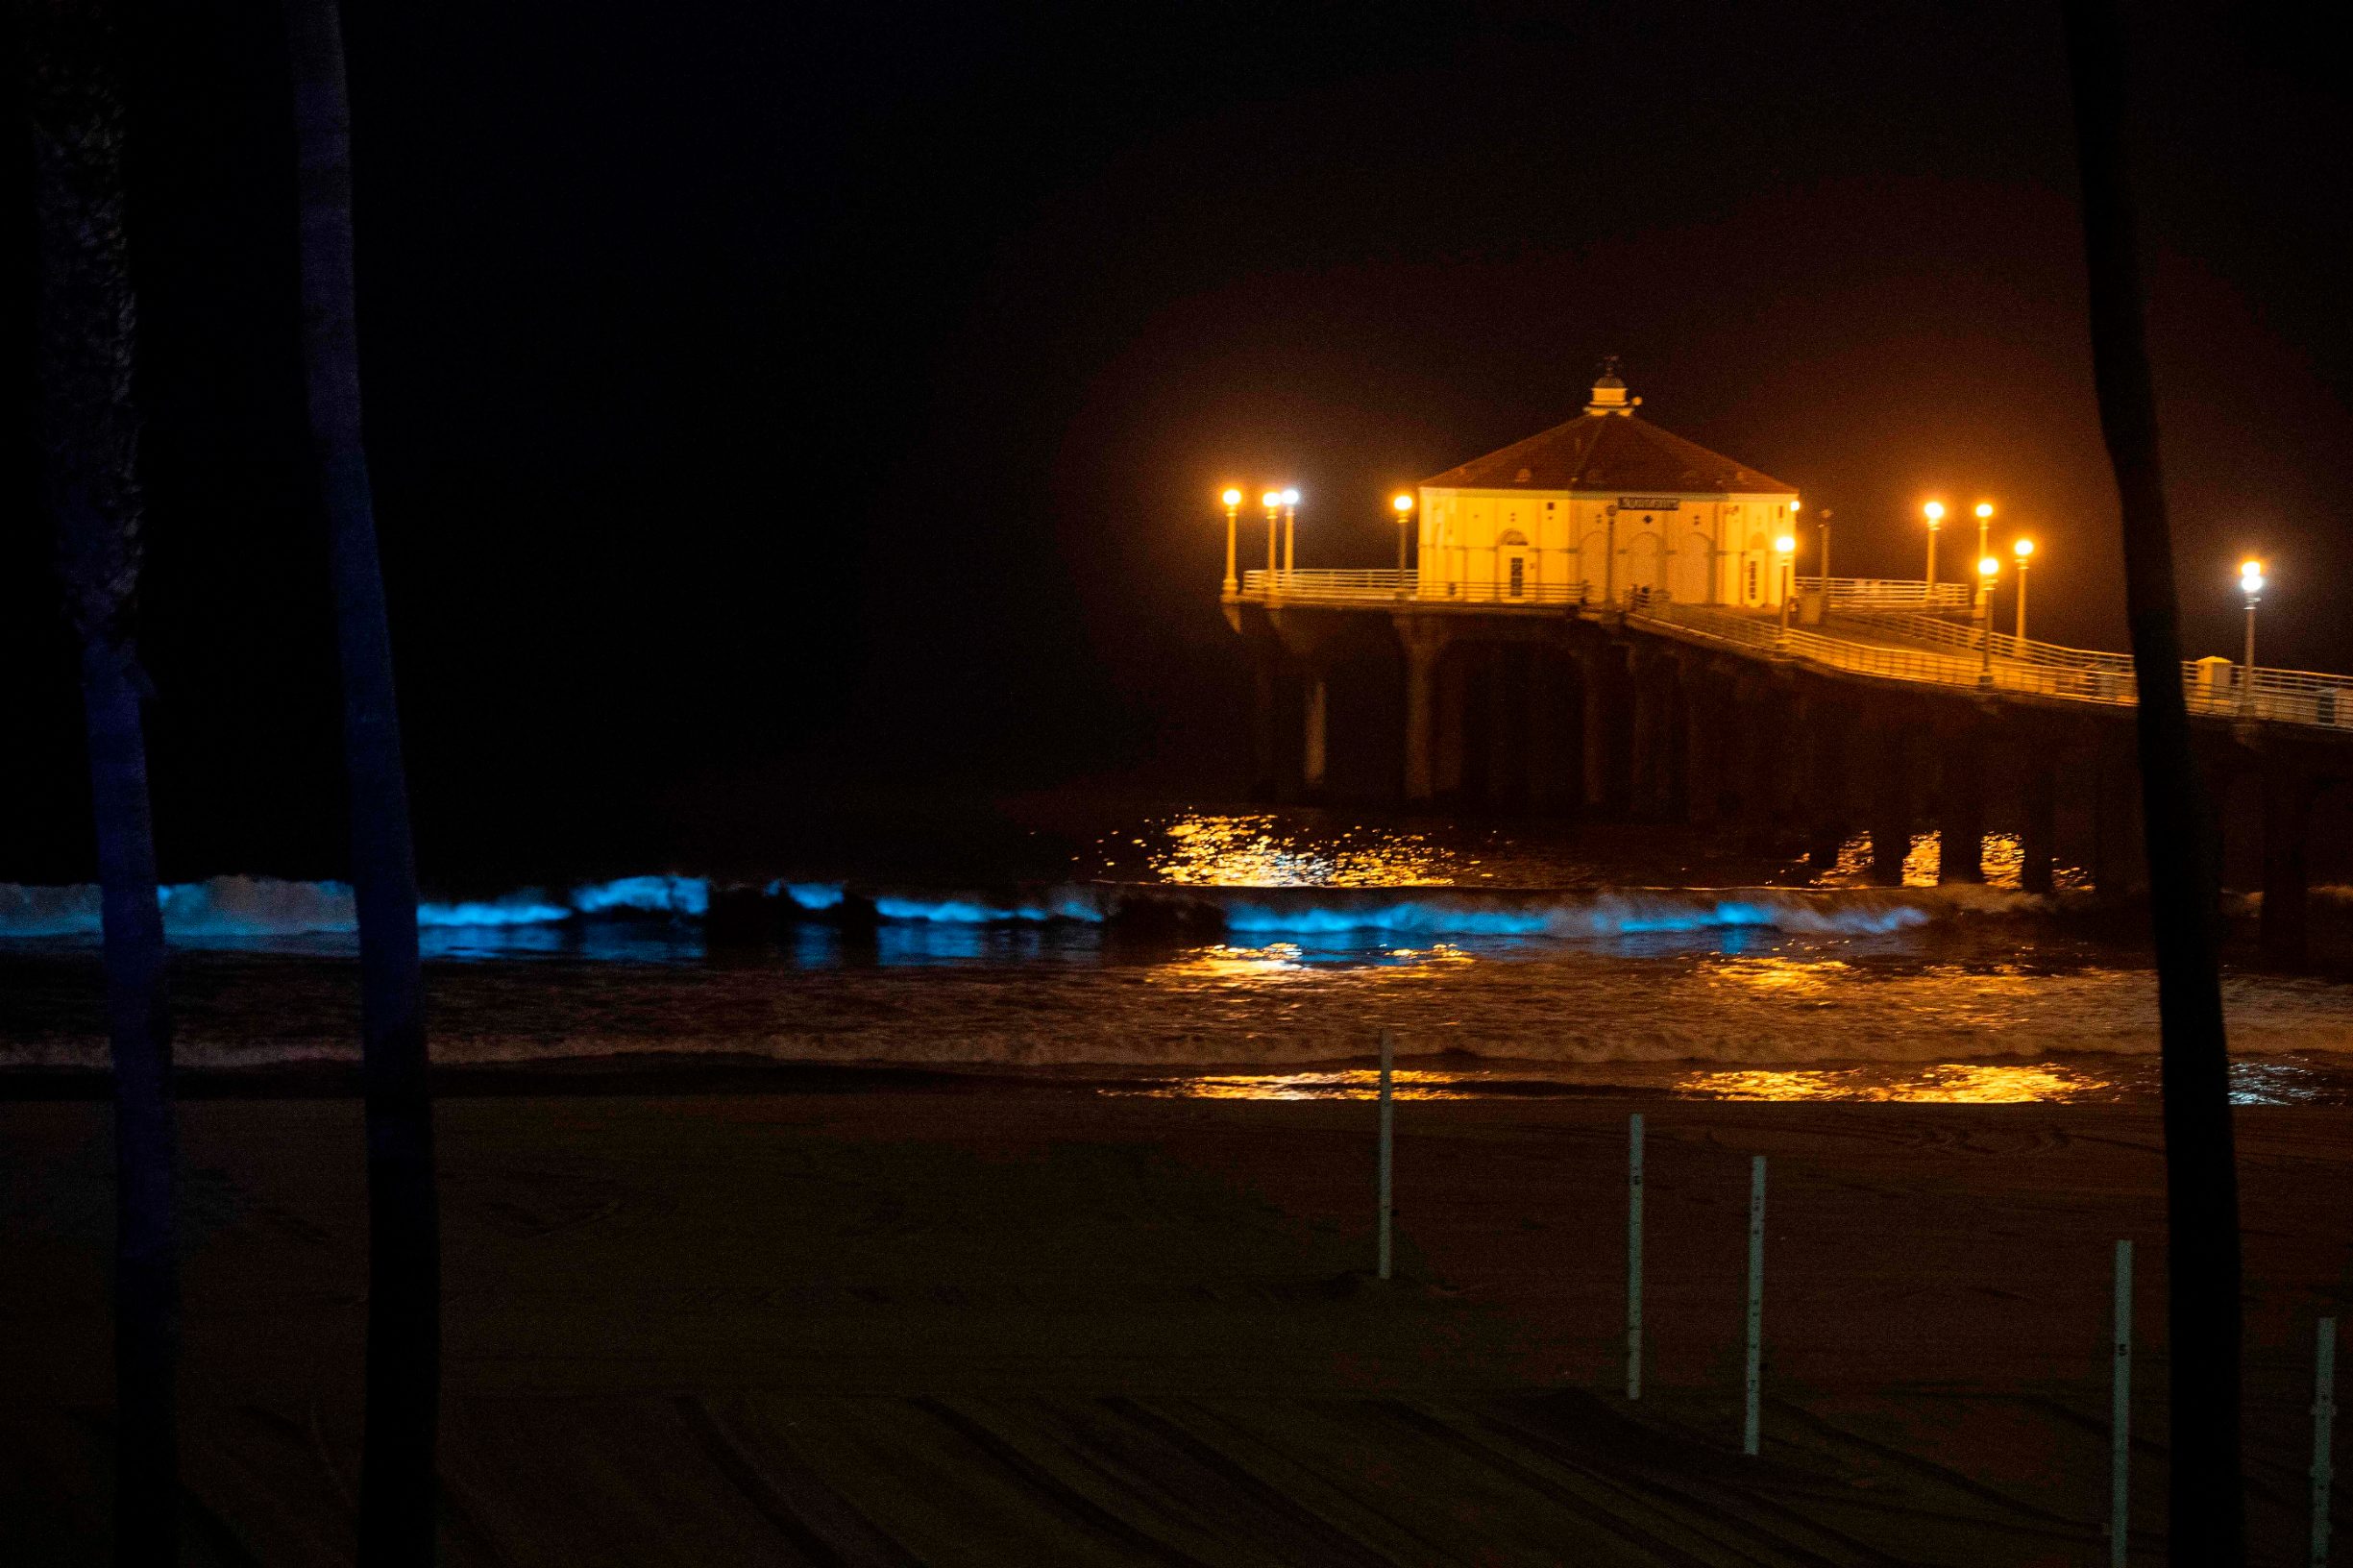 The Pier is seen as bioluminescent waves crash on the sand, shining with a blue glow on April 28, 2020, in Manhattan Beach, California. - Bioluminescence is a phenomenon caused by certain kinds of phytoplankton associated with red tide that by night generate a pulse of blue light as the waves crash. (Photo by VALERIE MACON / AFP)